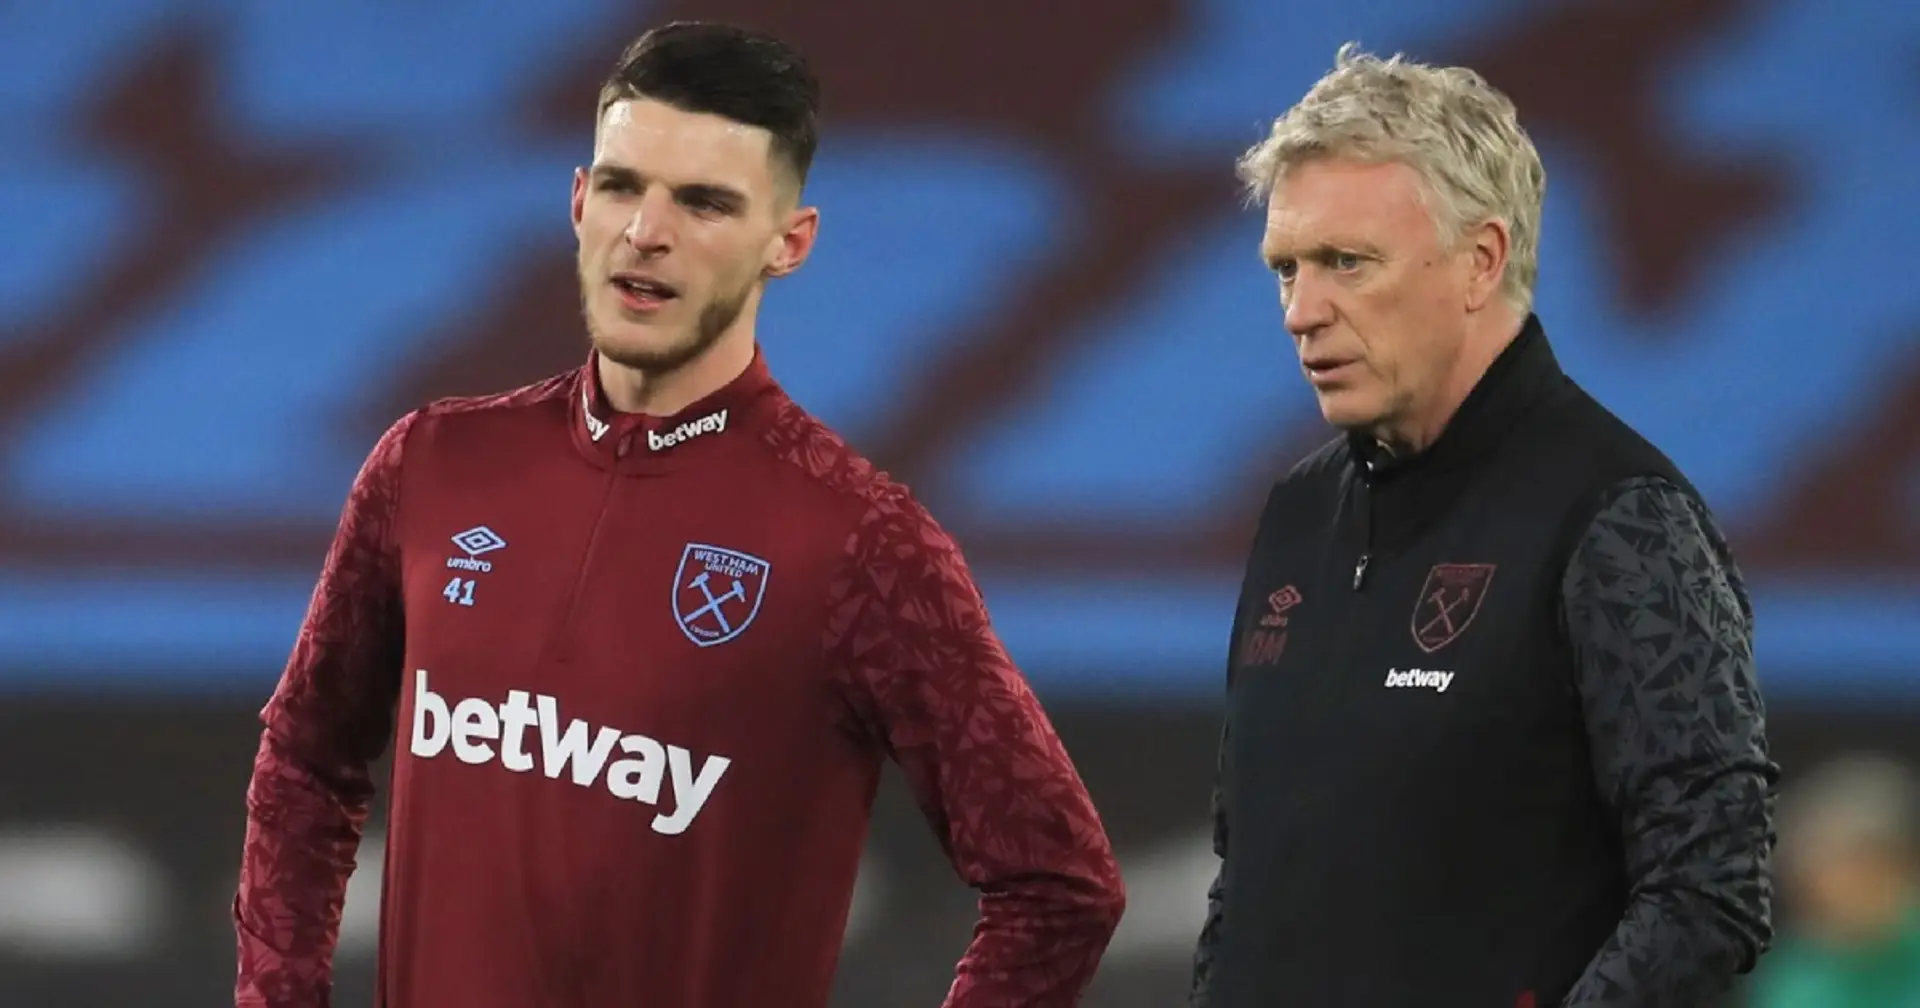 Moyes on Rice to Man United transfer talk: 'We won't roll over and let Declan walk out of the building'